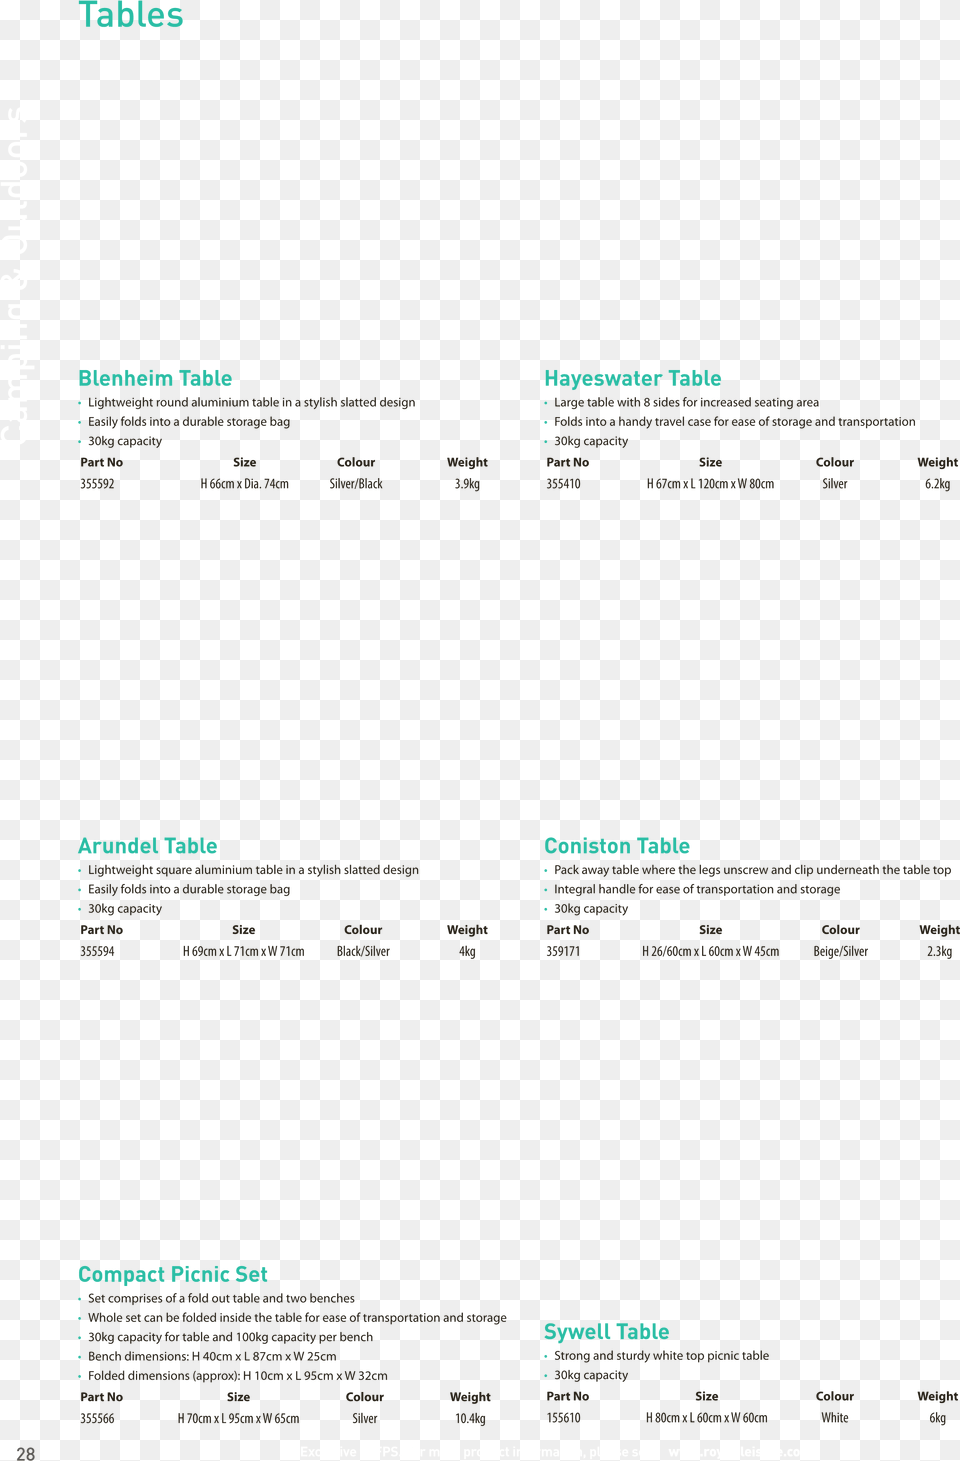 Document, Page, Text Free Png